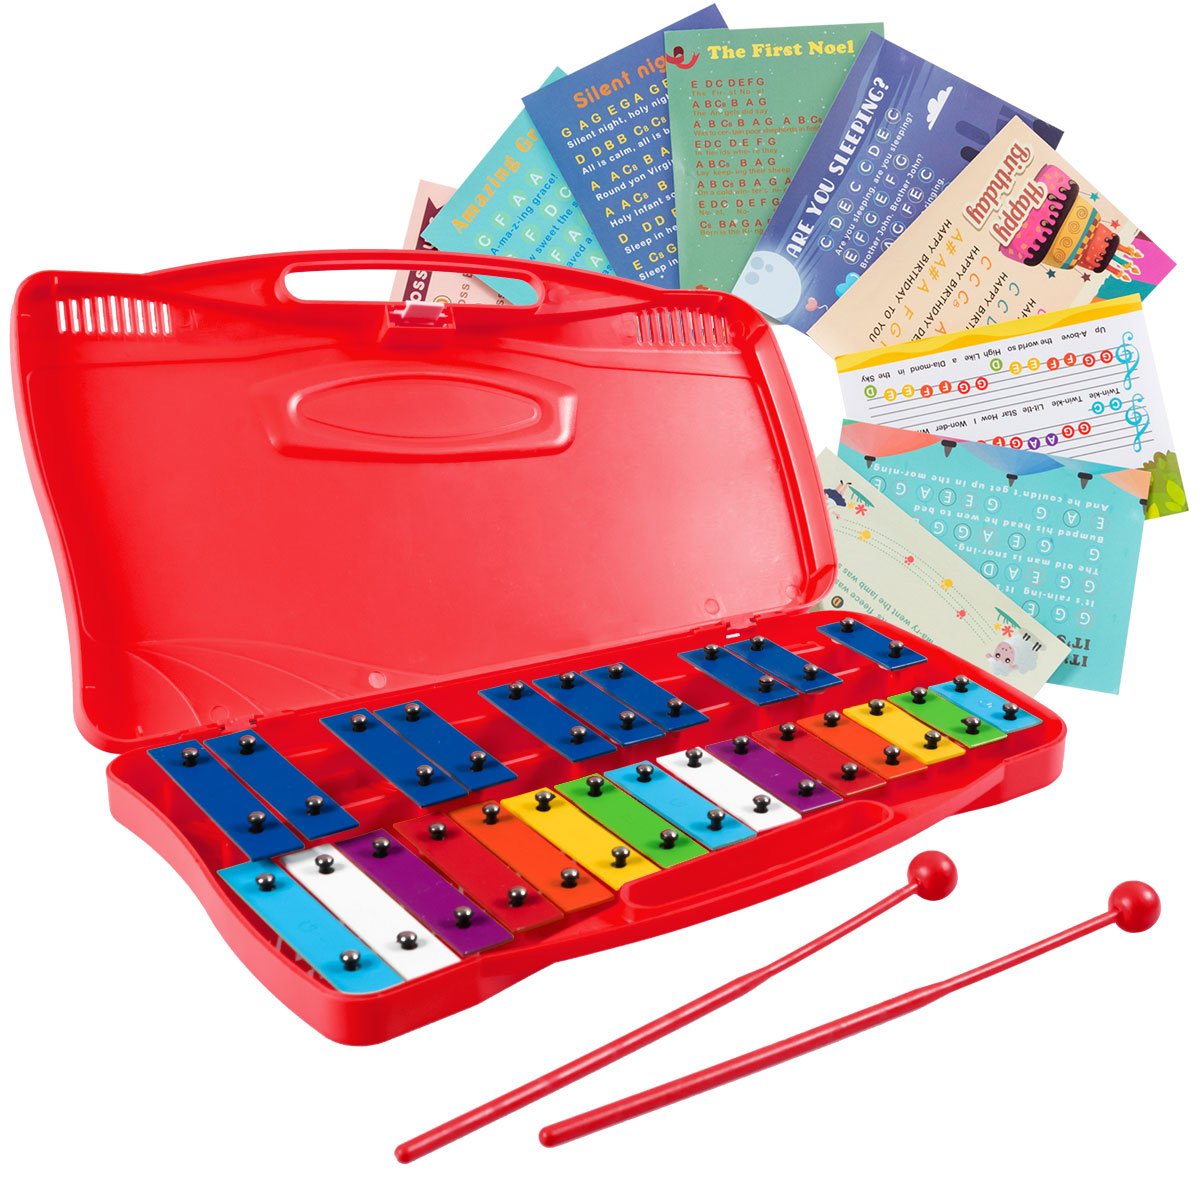 Playful Rhythms: 25 Note Xylophone with Suitcase for Kids Red